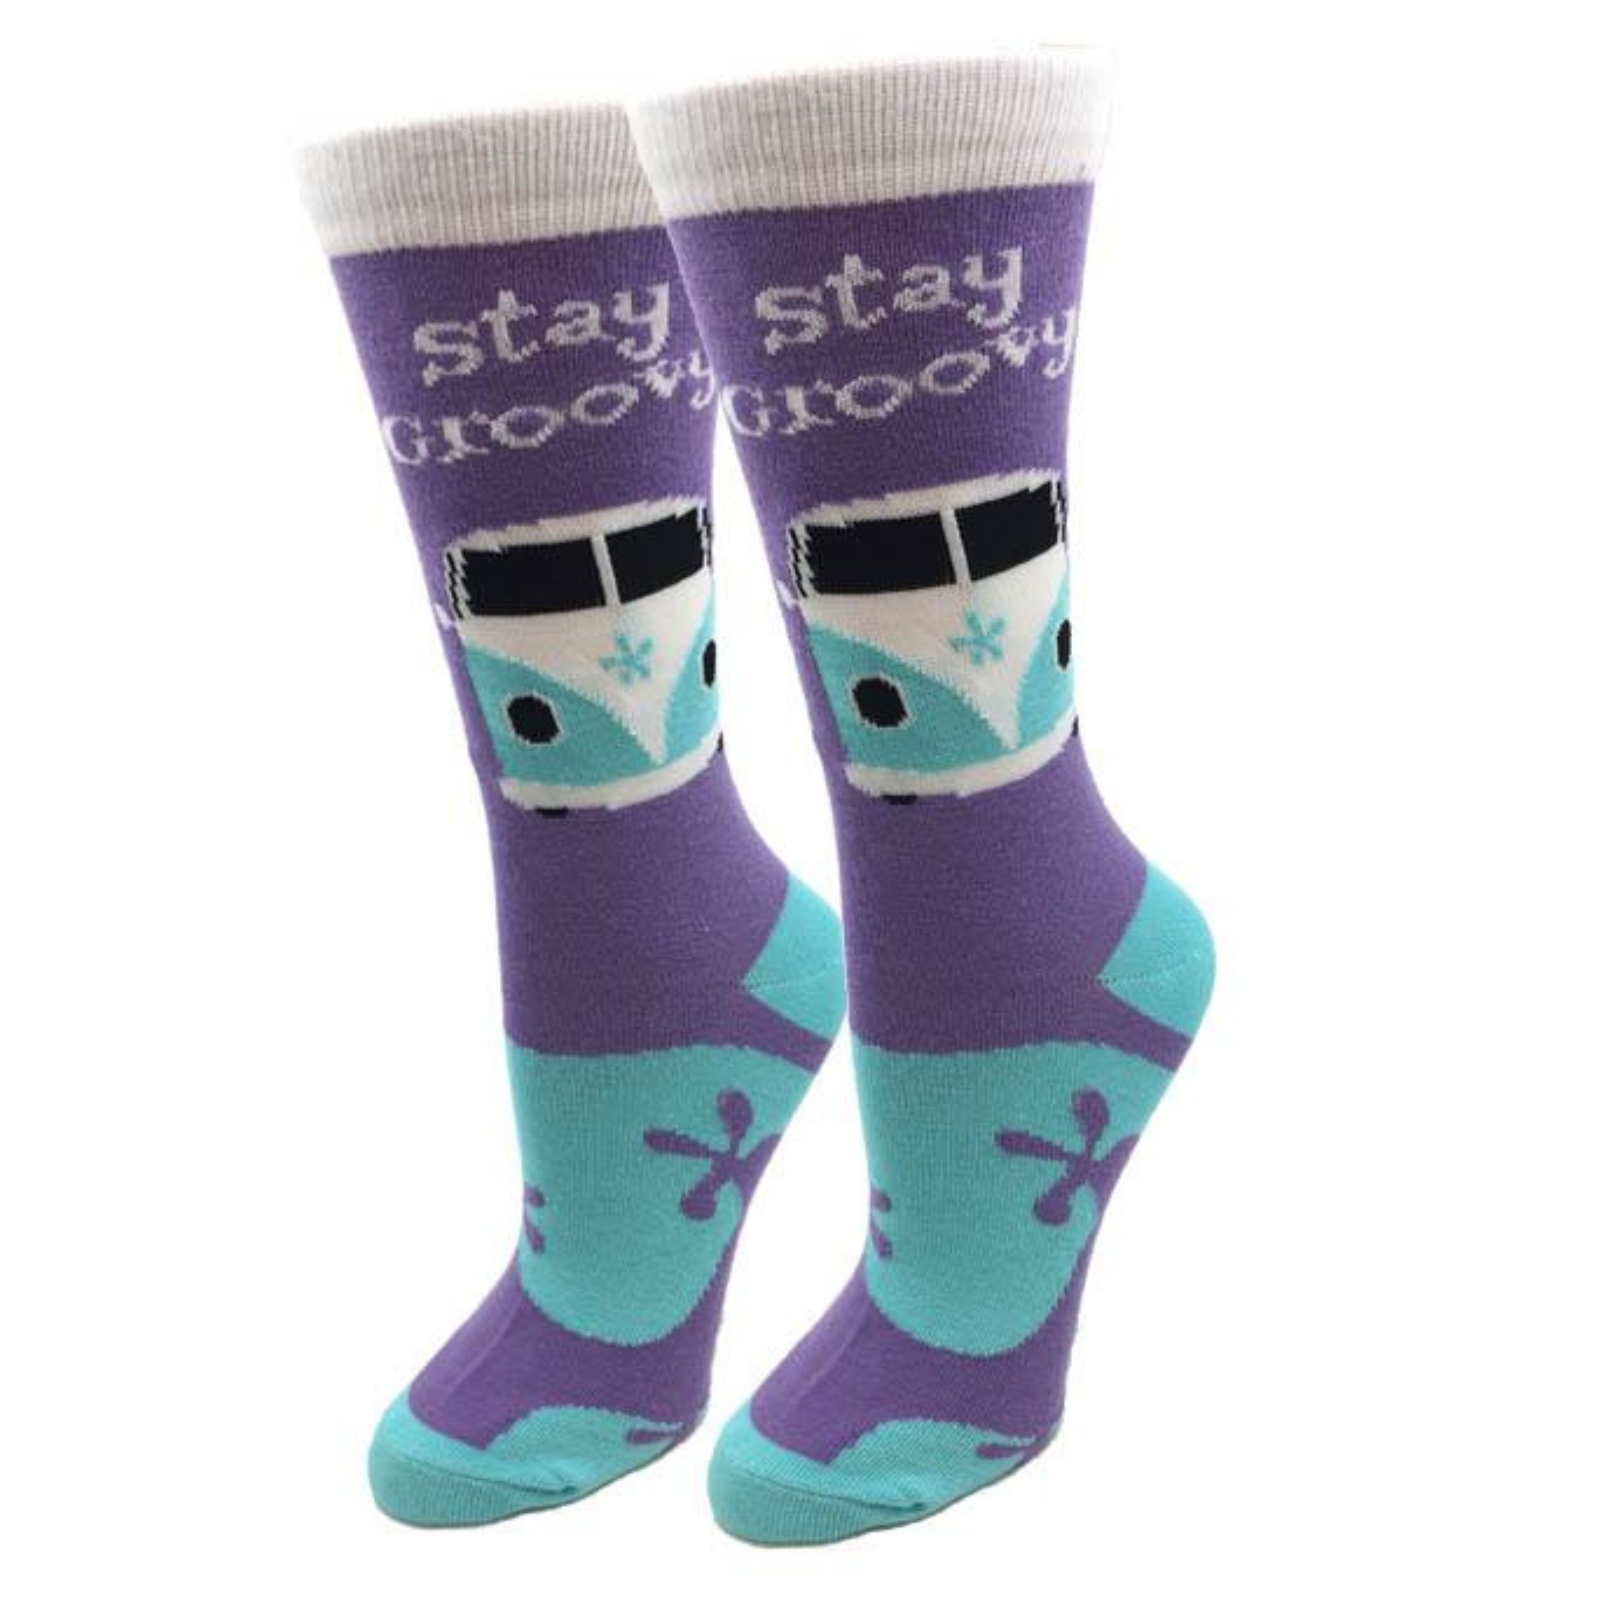 Sock Harbor Stay Groovy women's crew sock featuring purple sock with the words "Stay Groovy" and vw van